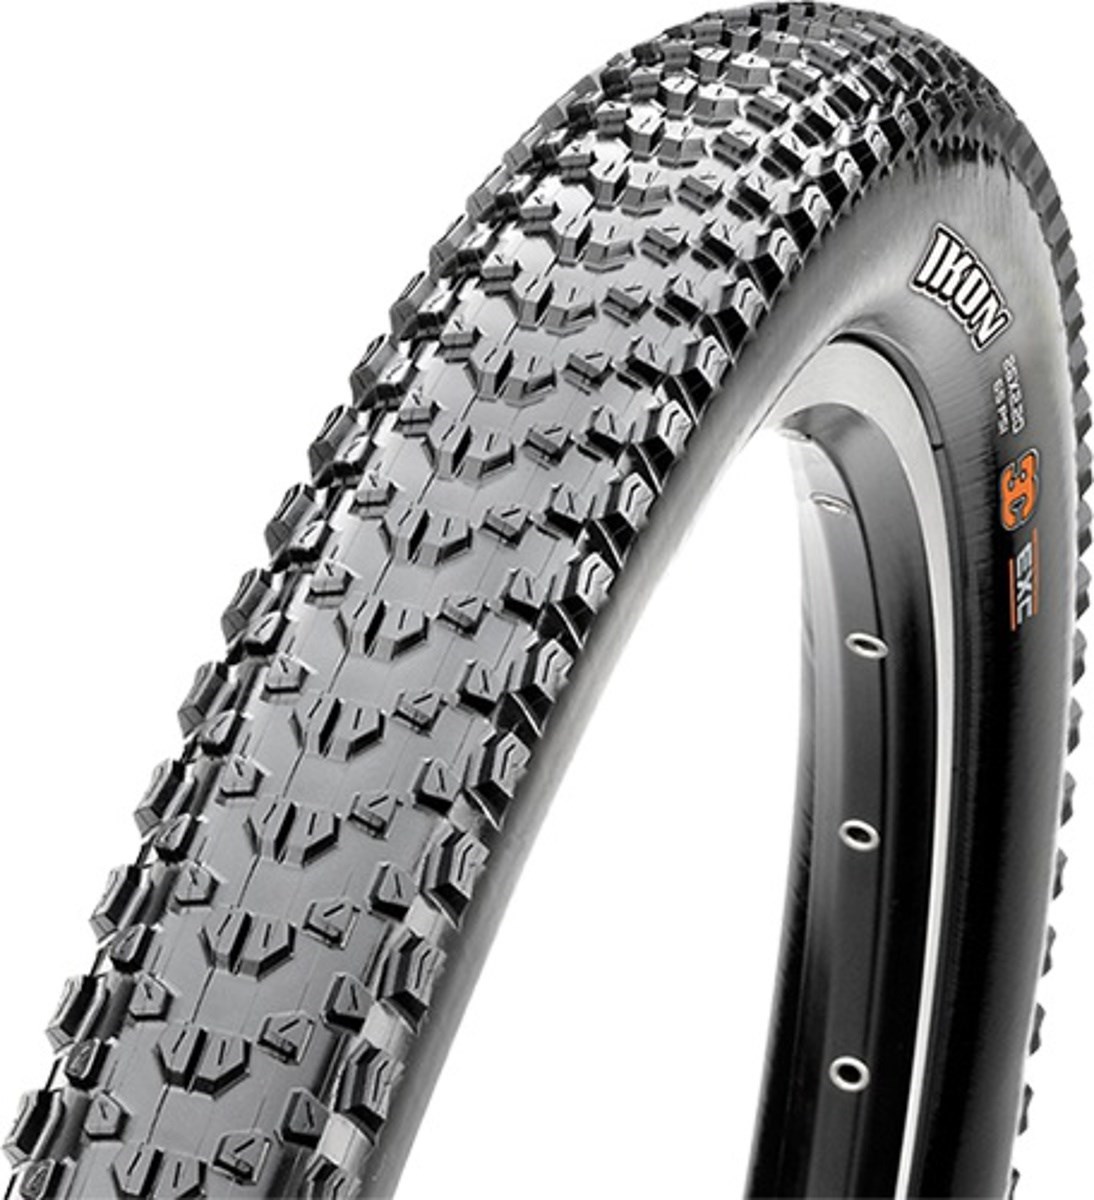 Maxxis Ikon 26" Off Road MTB Tyre product image